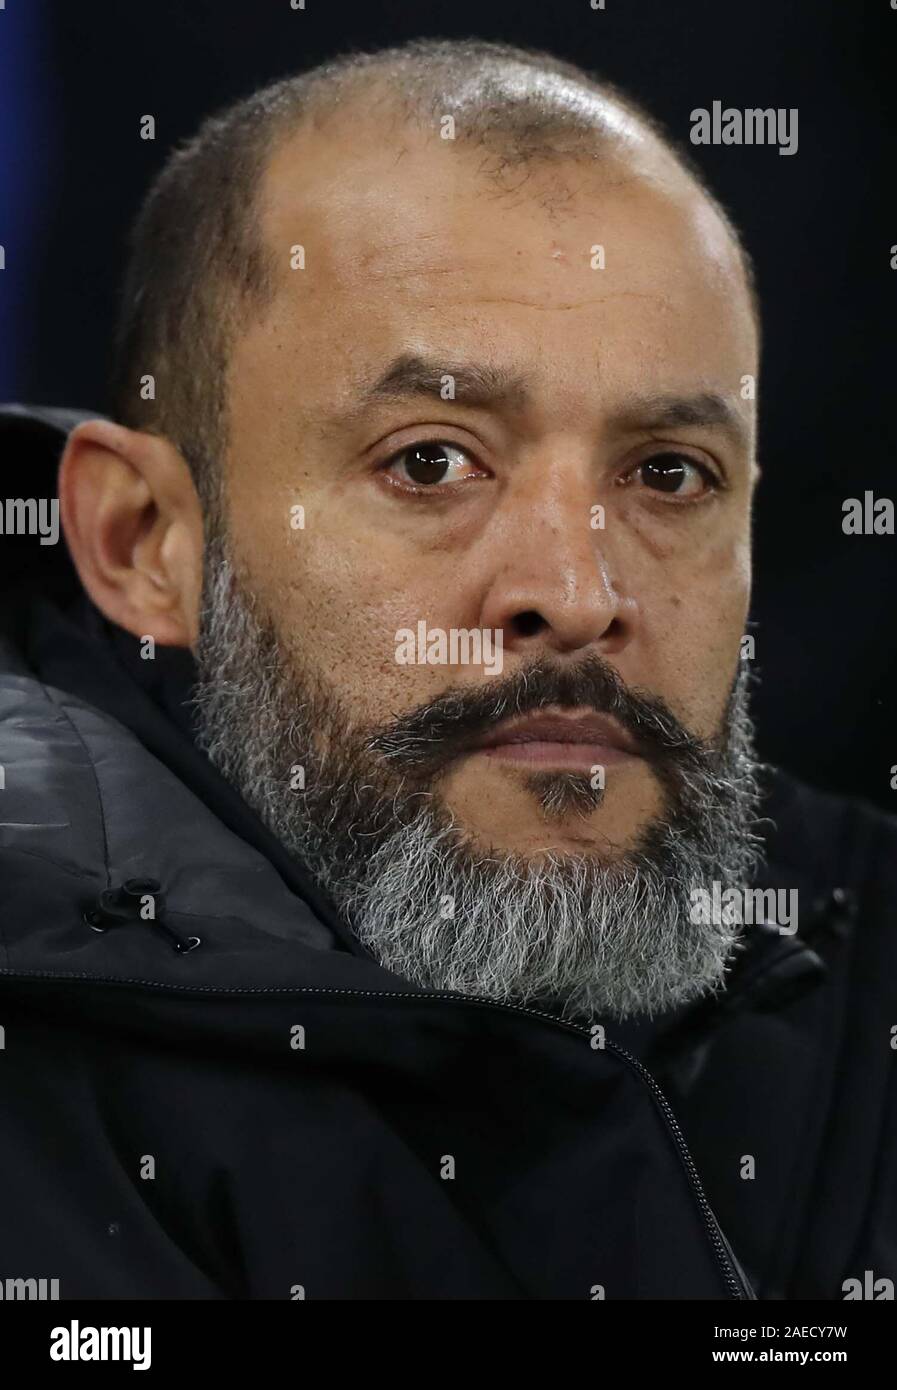 Wolves manager Nuno during the Premier League match between Brighton & Hove Albion and Wolverhampton Wanderers at The Amex Stadium in Brighton. 08 December 2019 Stock Photo